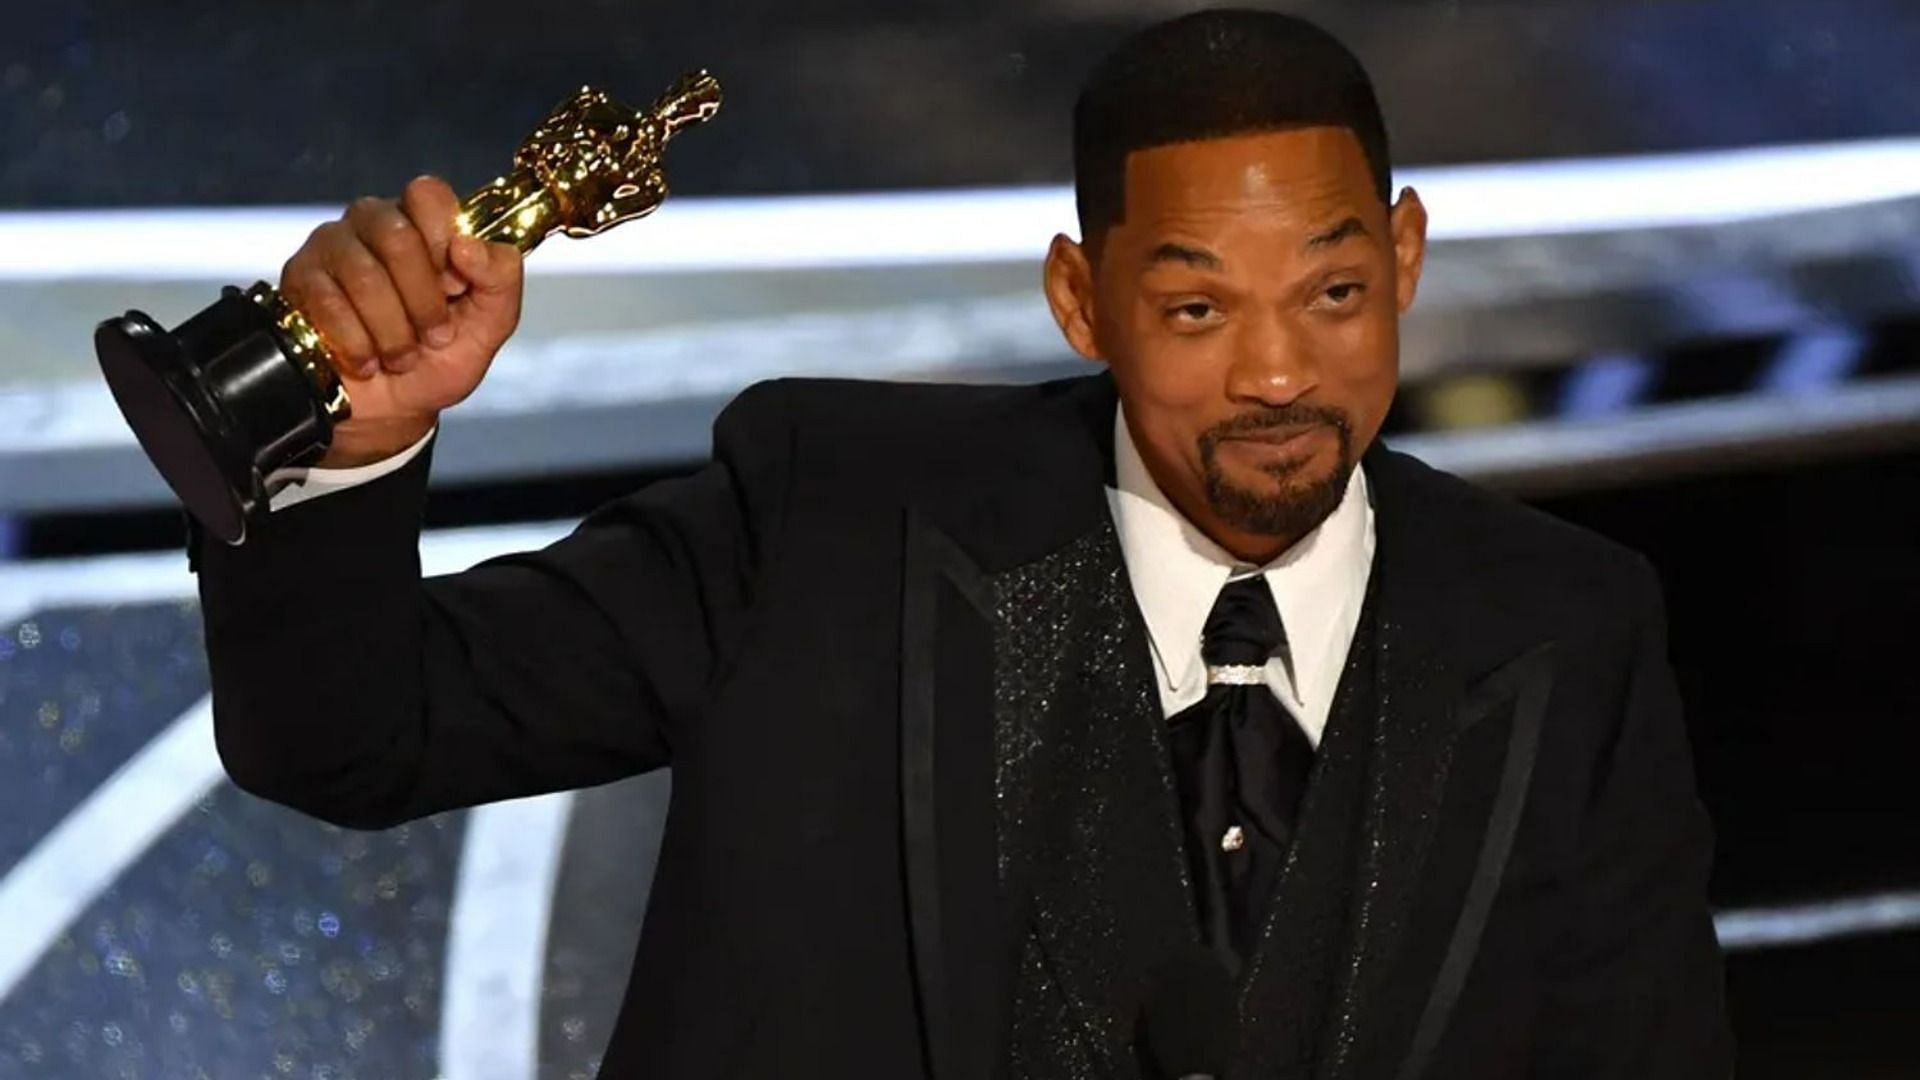 Will Smith won the Best Actor award at the Oscars for his role in King Richard (Image via AFP)